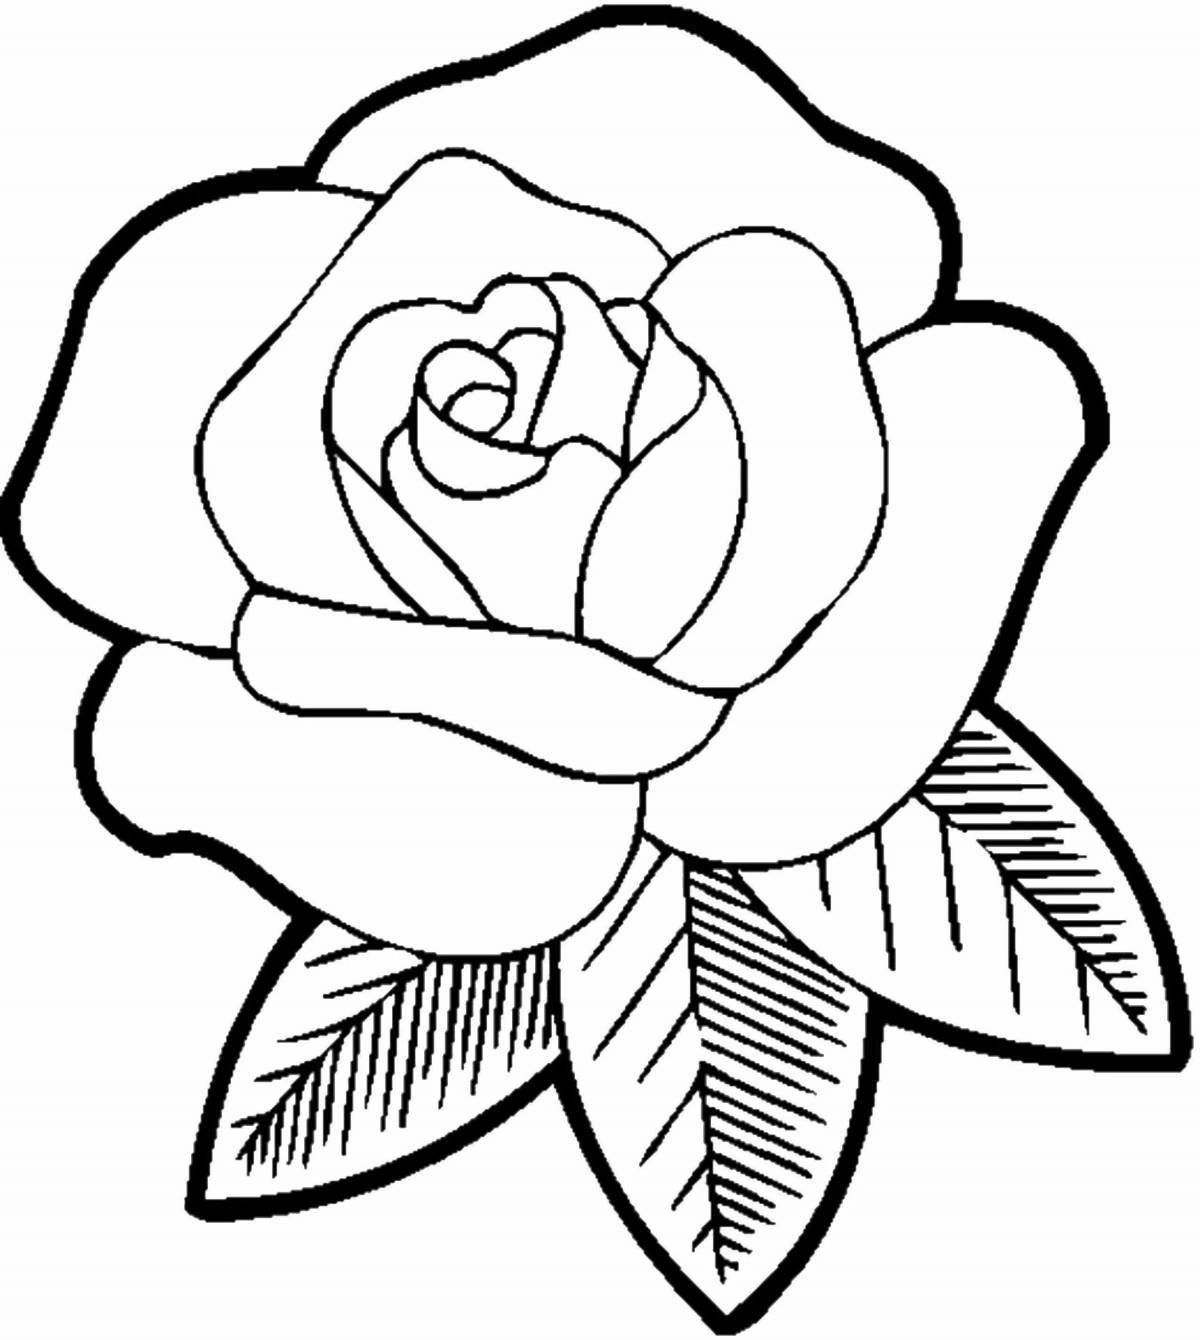 Light serene coloring page